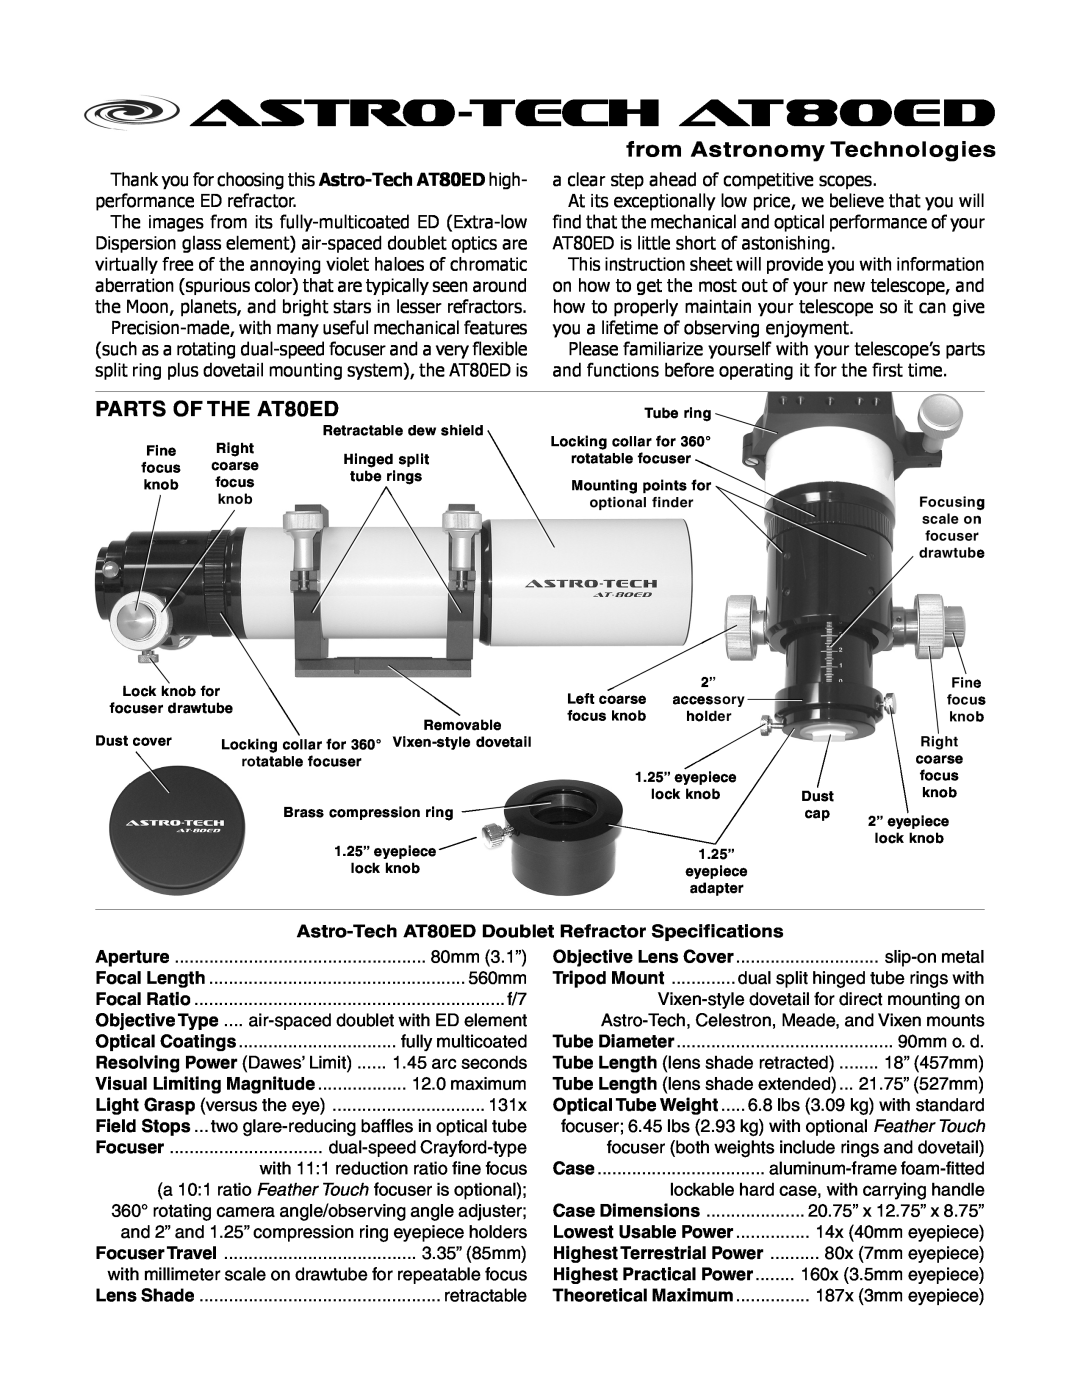 Meade instruction sheet Astro-Tech AT80ED Doublet Refractor Specifications, 3.35” 85mm, retractable, astro-tech AT80ED 